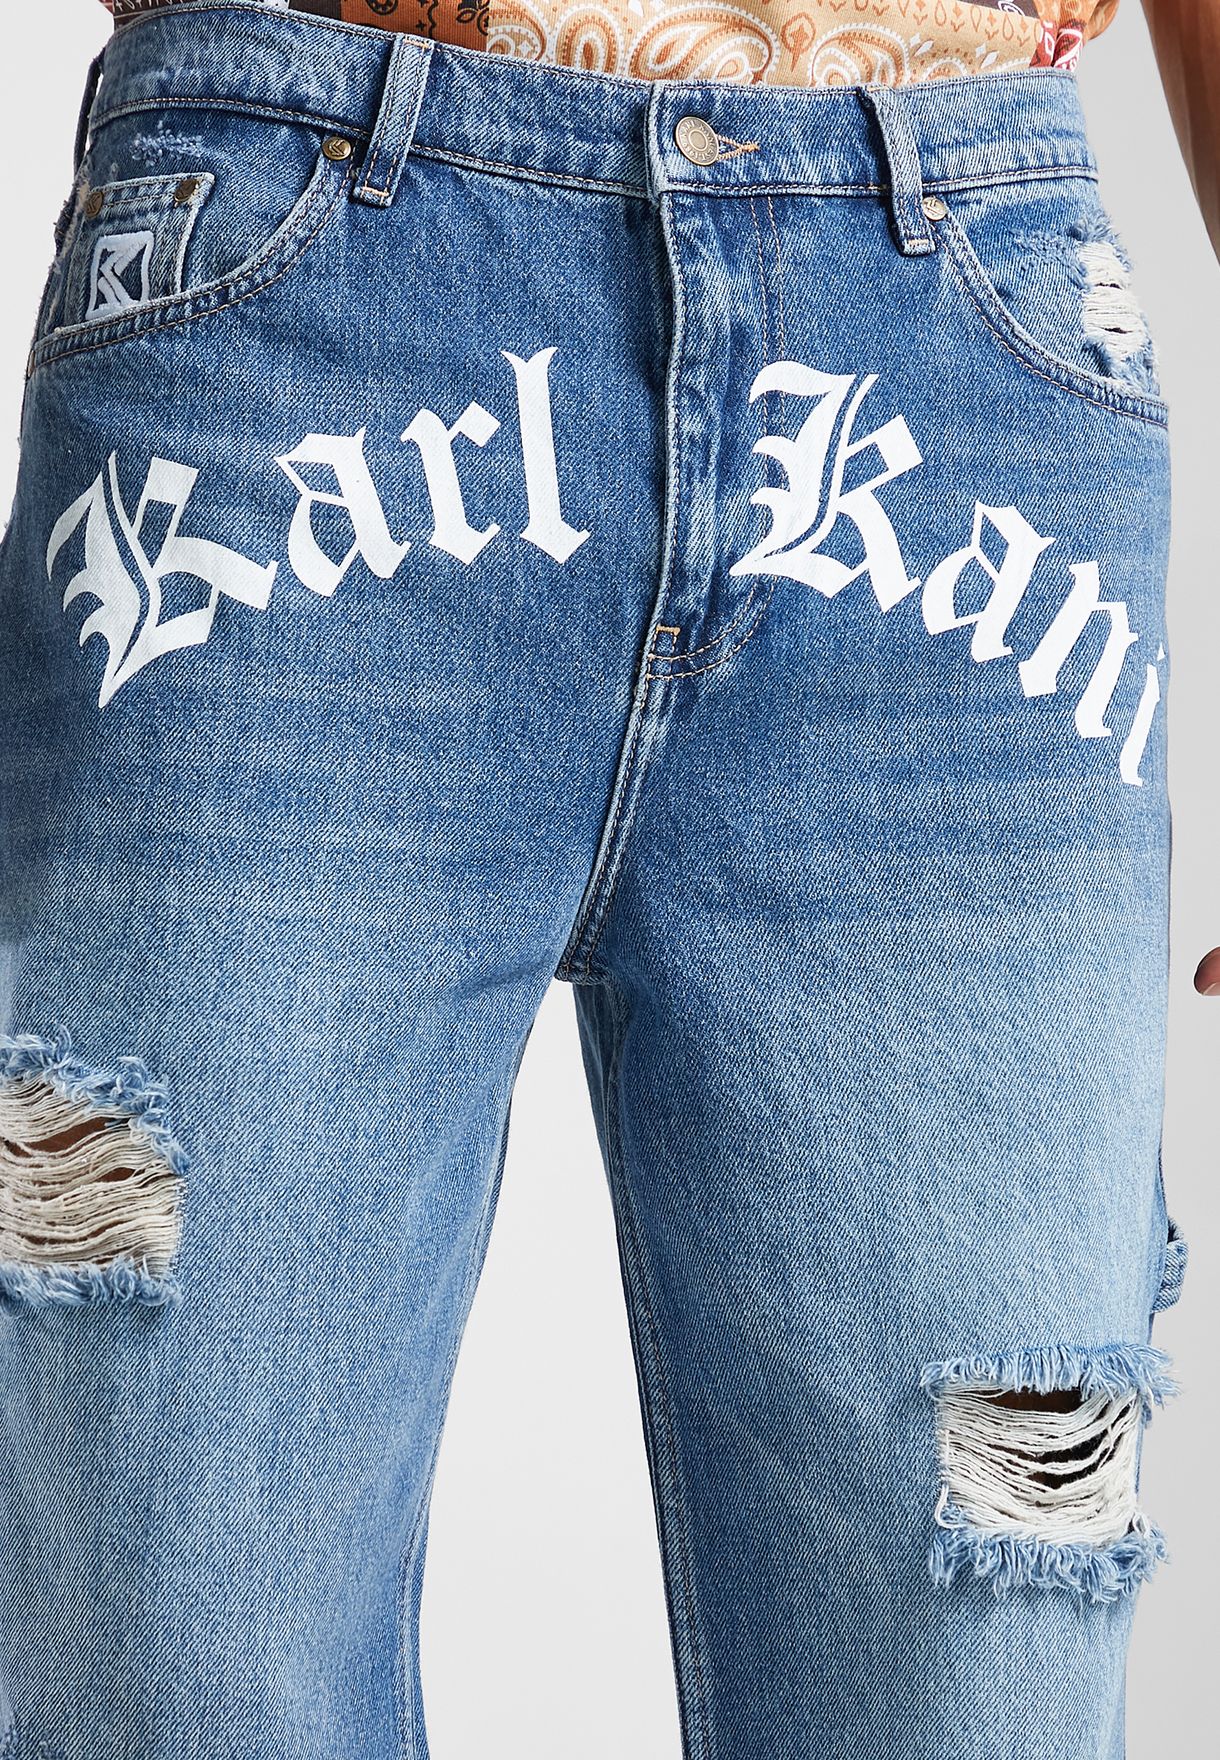 Old English Baggy Jeans